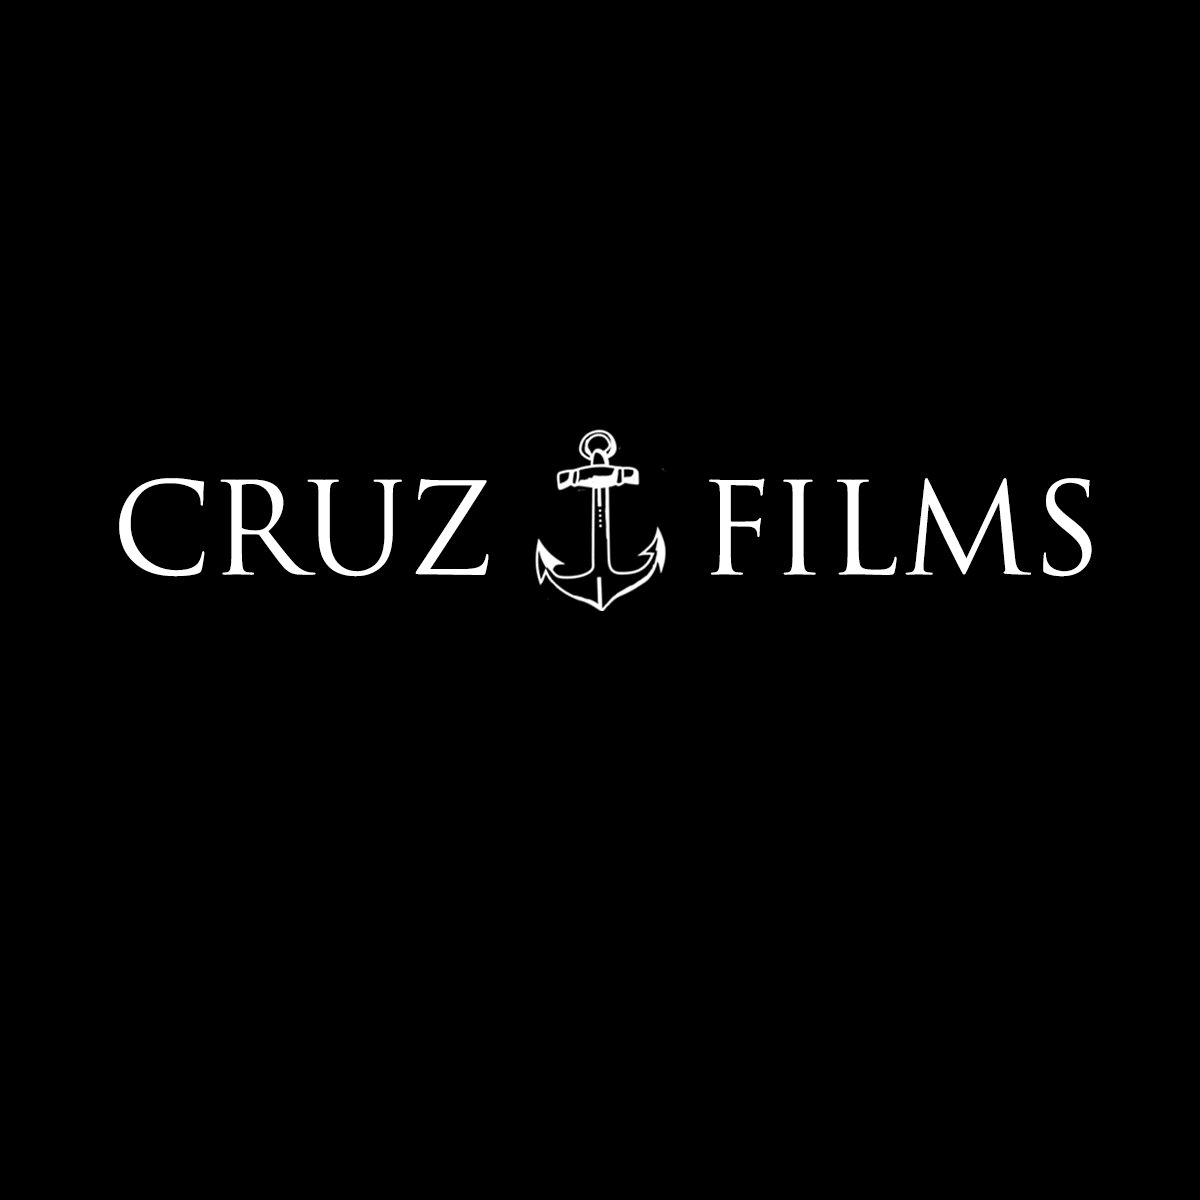 My name is Ulises Martinez. I create cinematic wedding videos. I would love to capture your special day!
https://t.co/0fdbrbMPhf